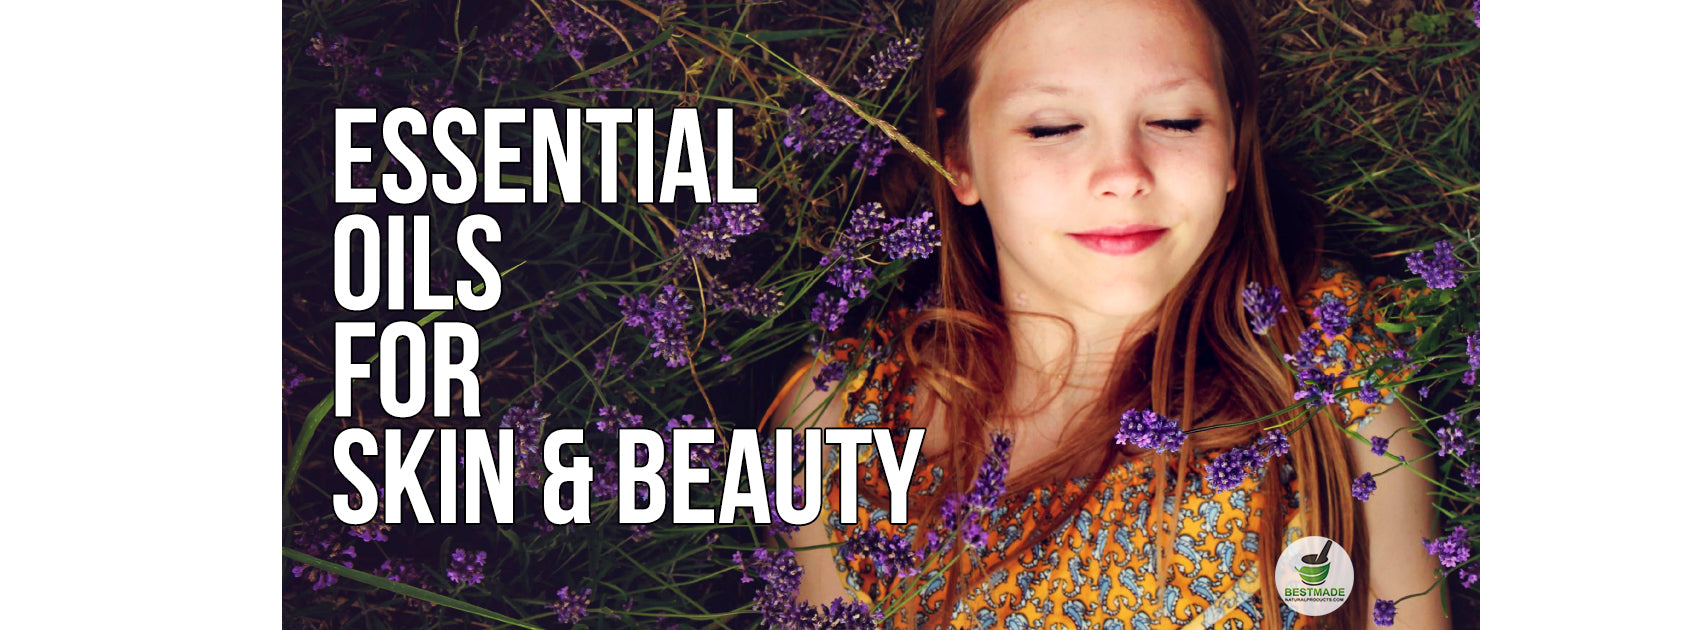 Essential Oils For Skin and Beauty